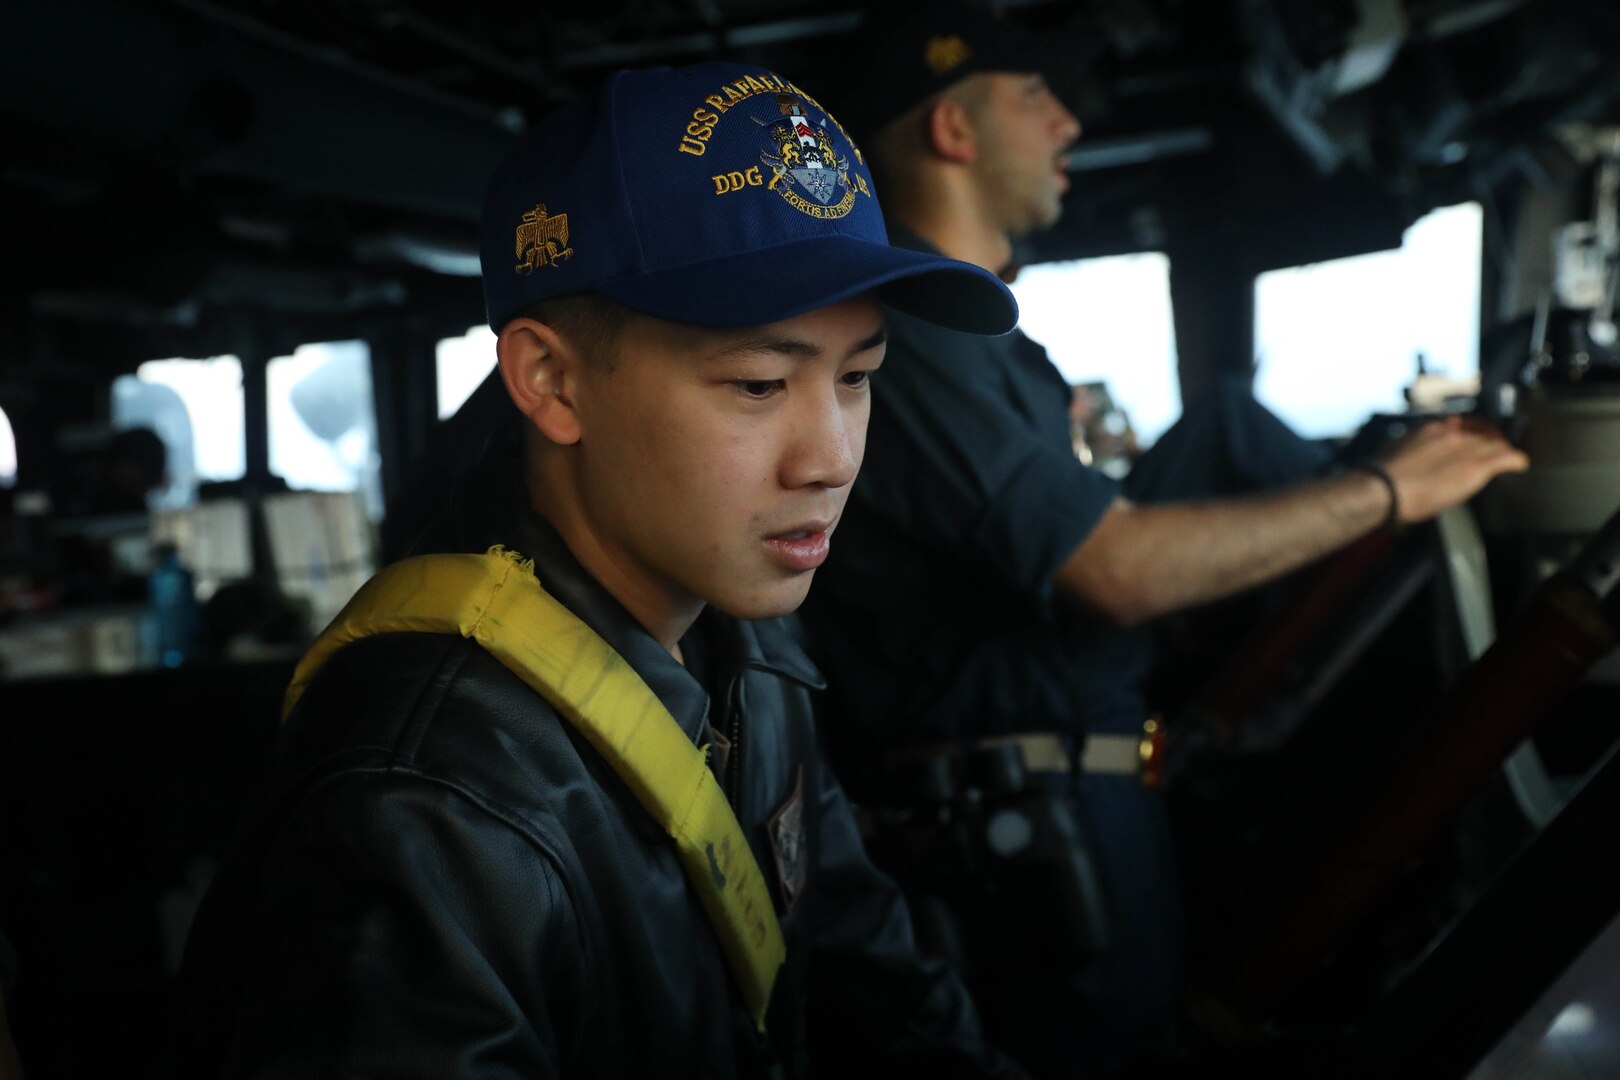 231102-N-CV021-1078 TAIWAN STRAIT (Nov. 2, 2023) Lt. j.g. Bryan Nguyen, from Fairfax Station, Virginia, stands watch on the bridge aboard the Arleigh Burke-class guided-missile destroyer USS Rafael Peralta (DDG 115) in the Taiwan Strait, Nov. 2. Rafael Peralta is forward-deployed and assigned to Commander, Task Force 71/Destroyer Squadron (DESRON) 15, the Navy’s largest DESRON and the U.S. 7th Fleet’s principal surface force. (U.S. Navy photo by Mass Communication Specialist 3rd Class Alexandria Esteban)